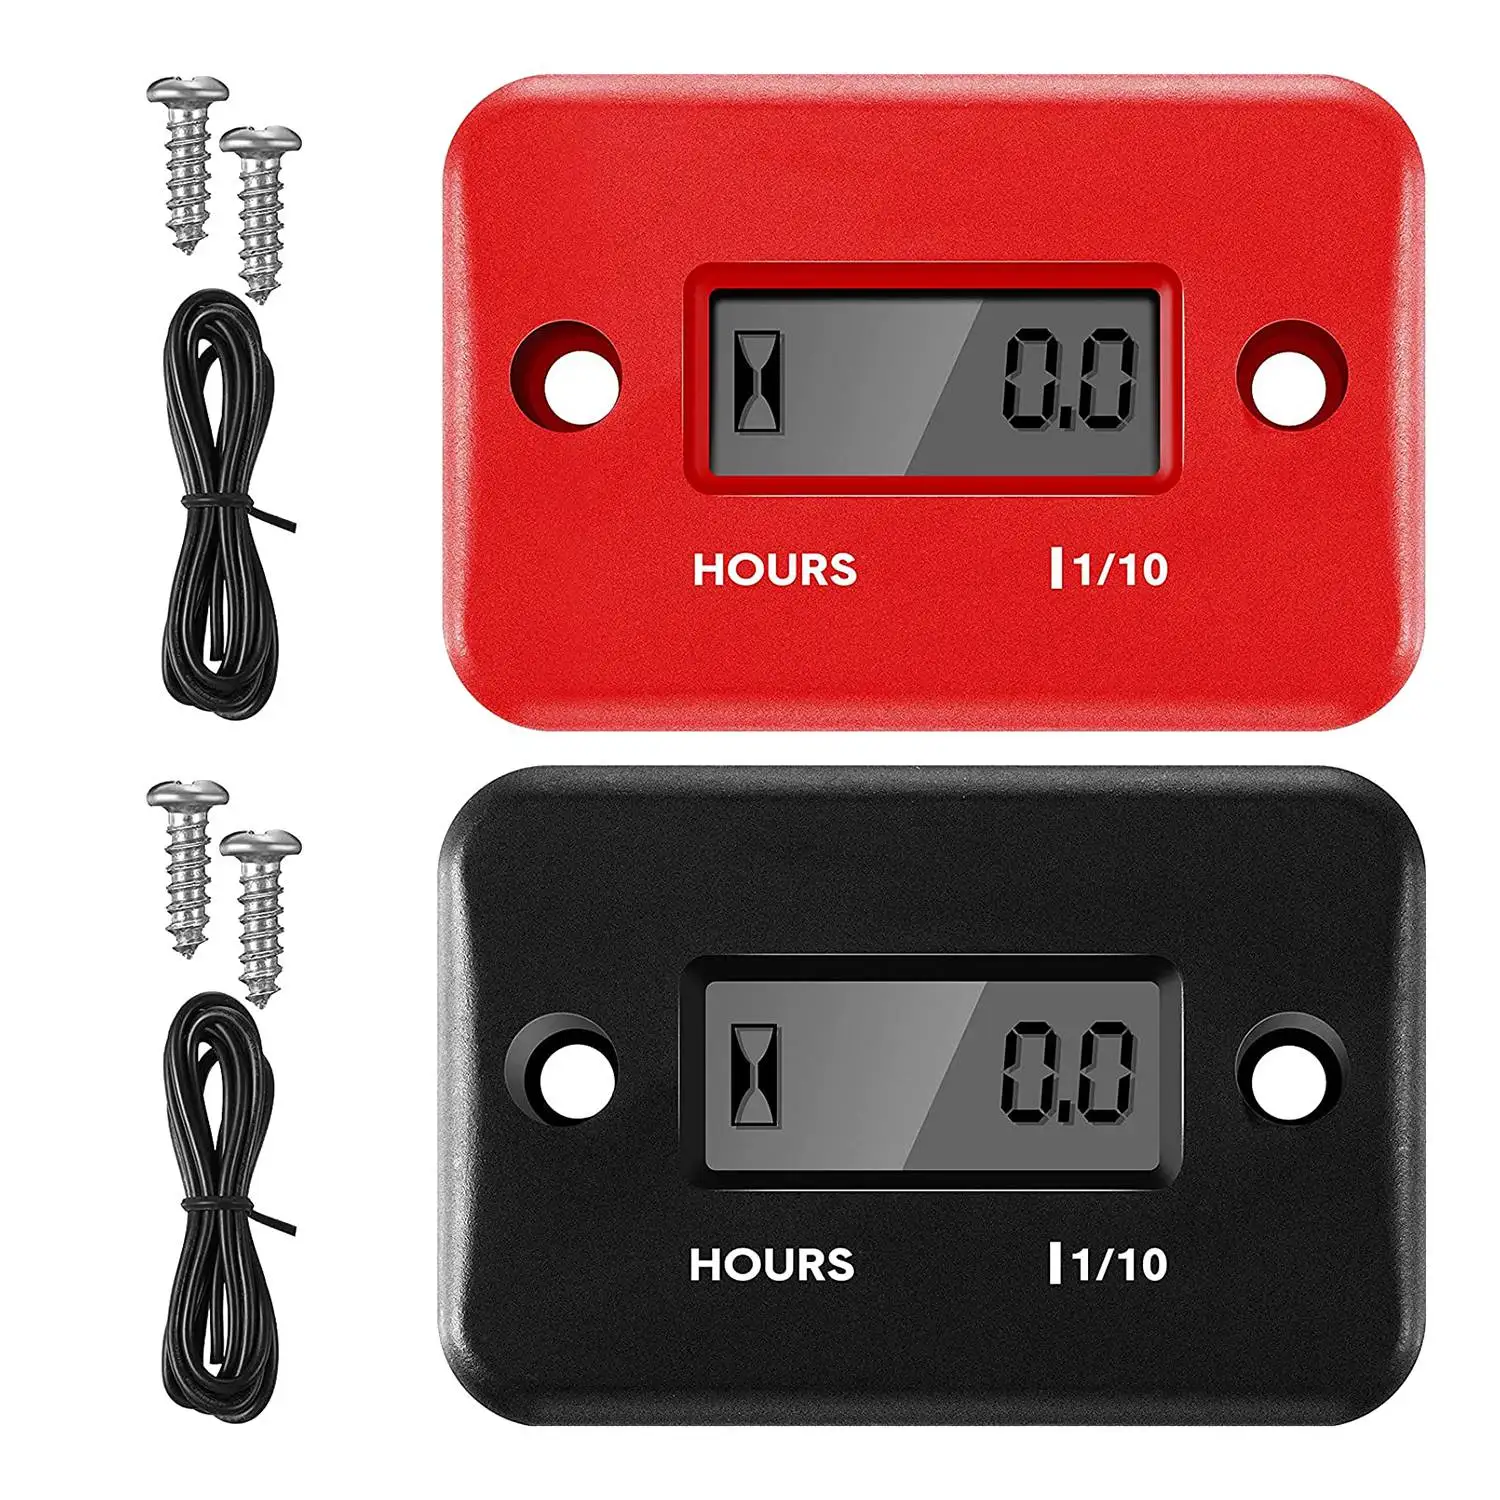 

2 Pieces Inductive Hour Meter for Gas Engine Lawn Mower Dirt Bike Motorcycle Motocross Snowmobile Marine (Black,Red)